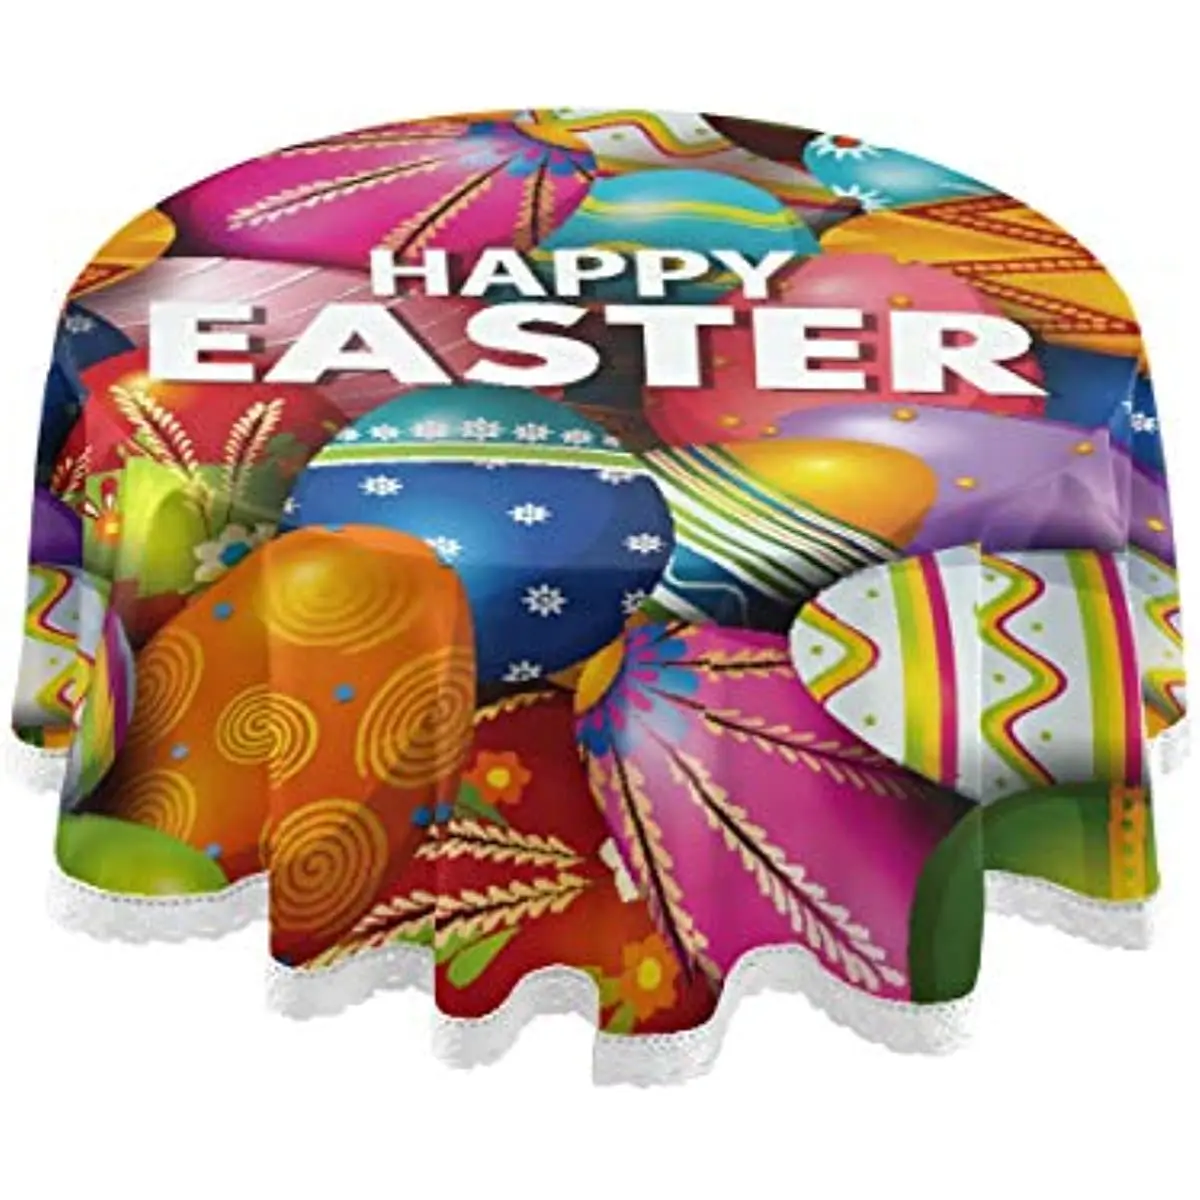 

60" Inch Round Tablecloth Circular Table Cover Happy Easter Rabbit for Buffet Table, Home,Parties, Holiday Dinner